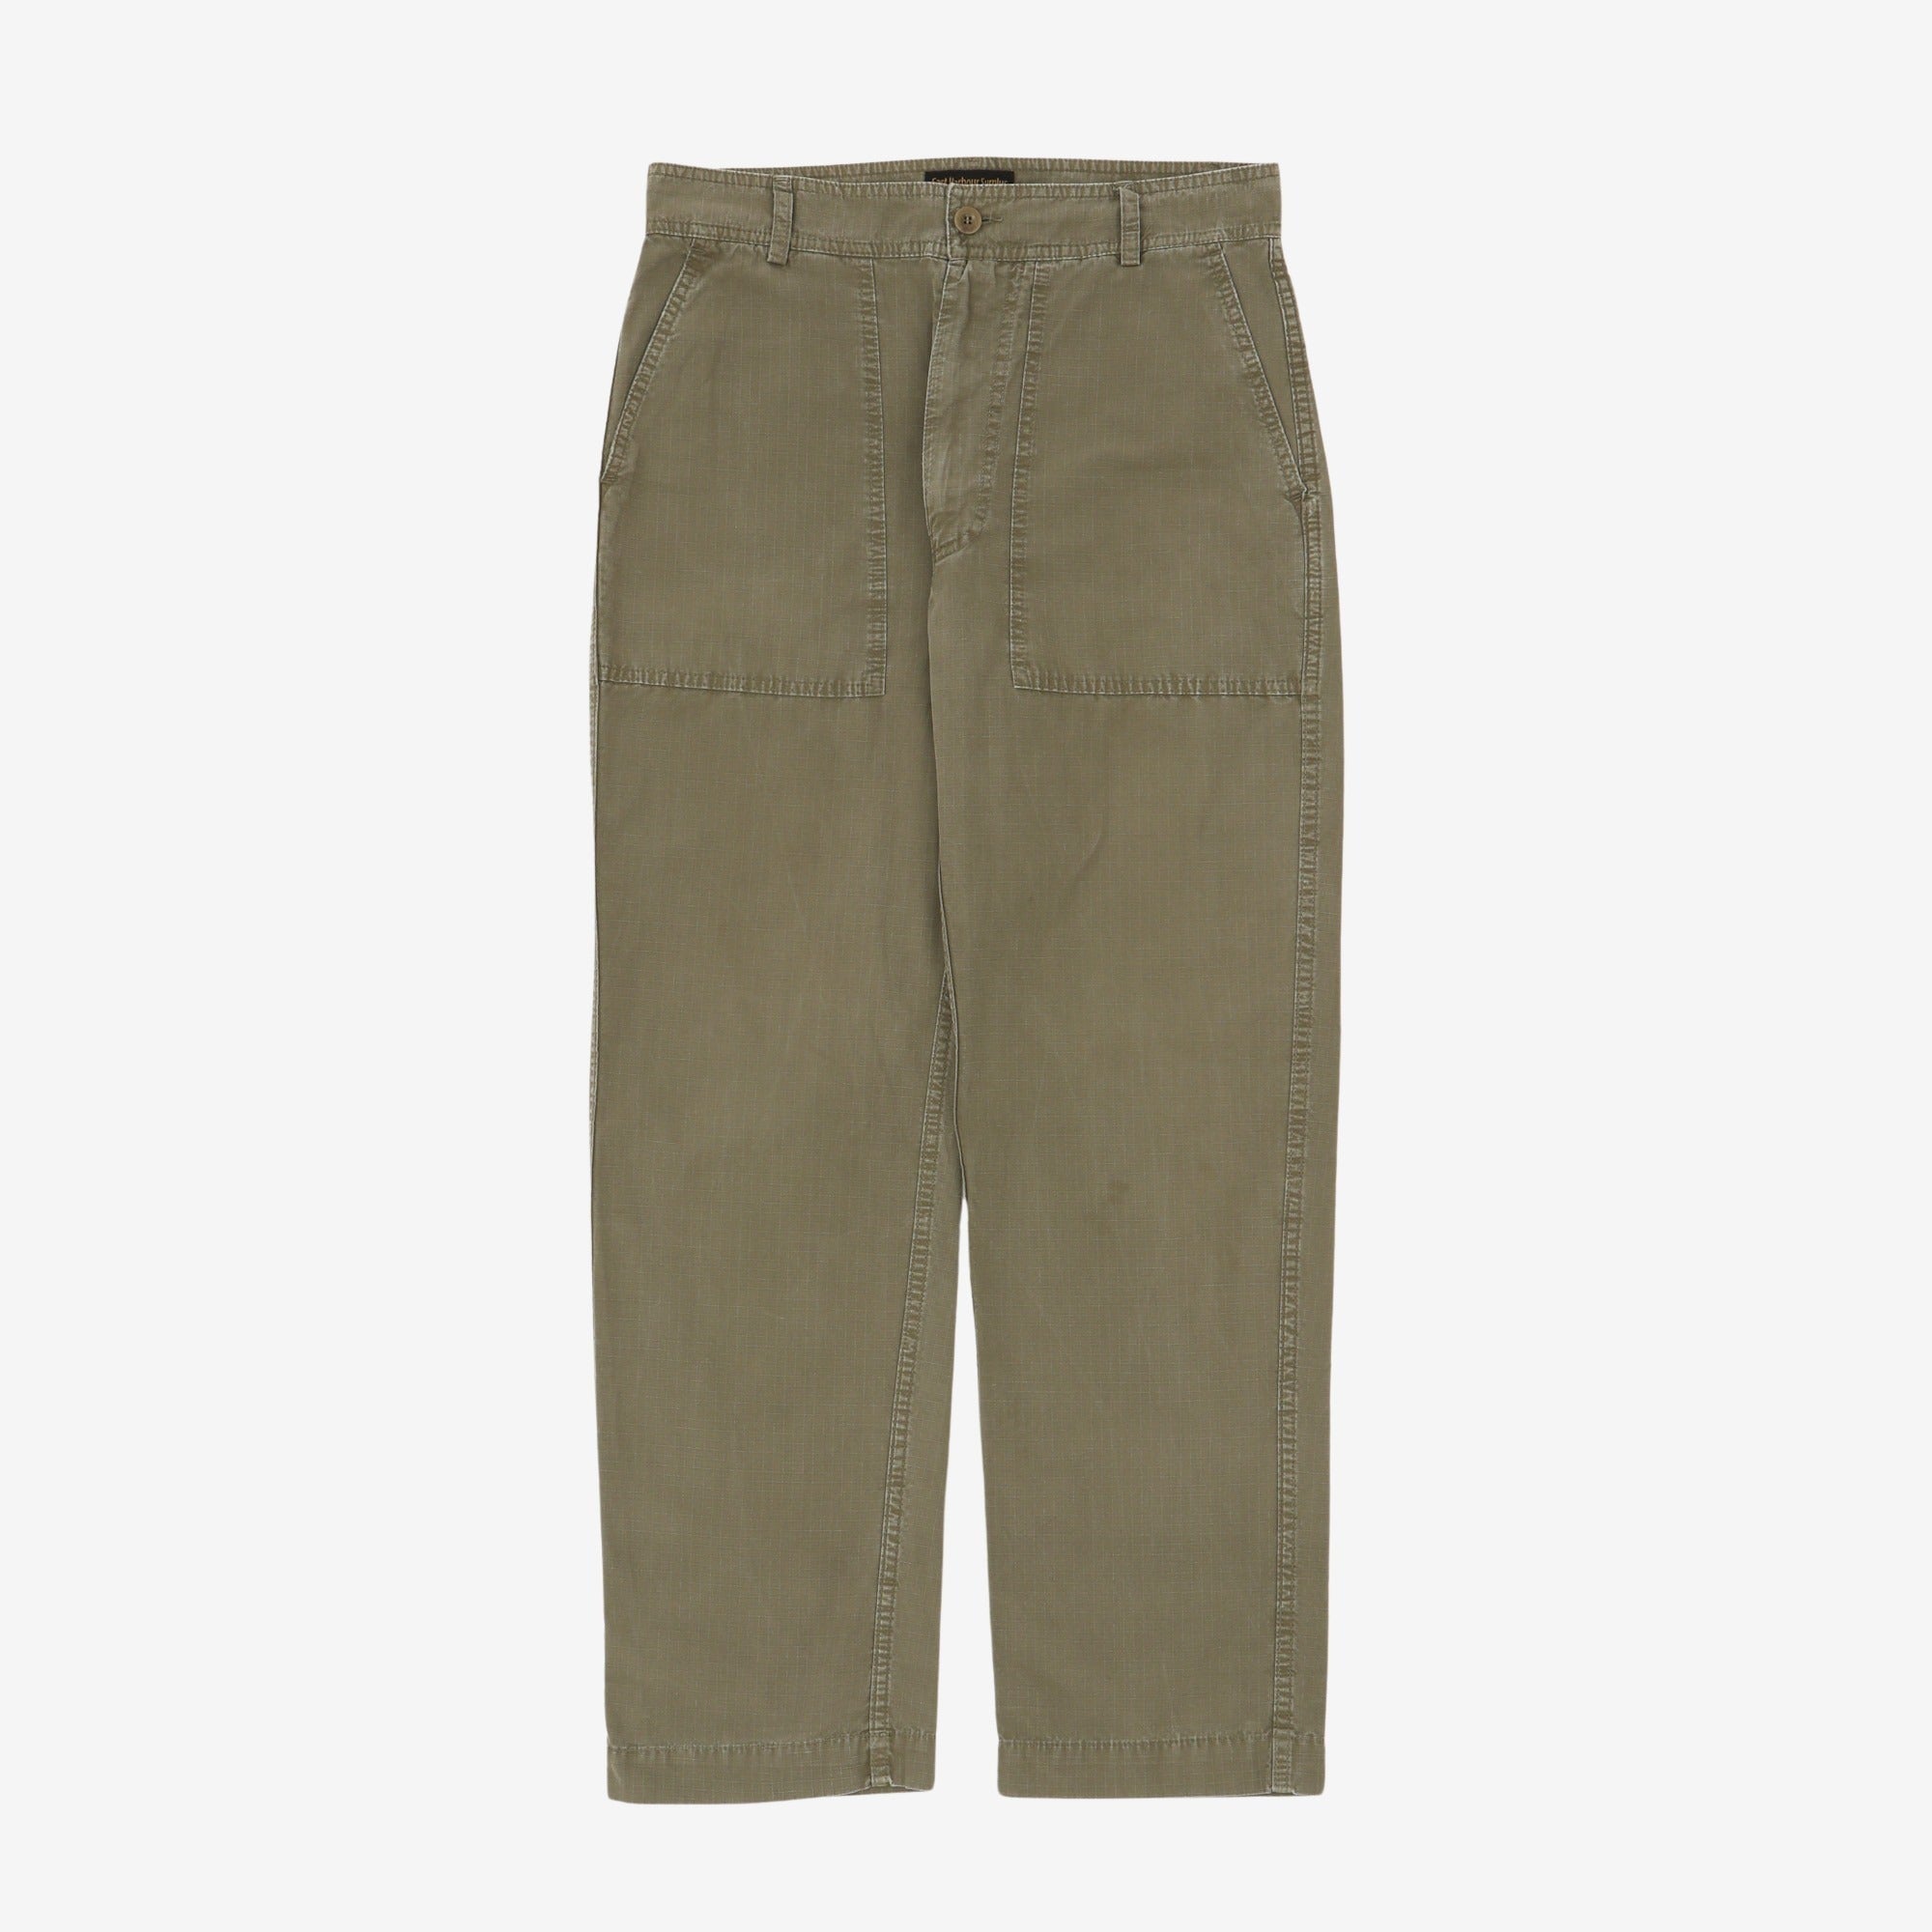 Military Rip-Stop Trousers